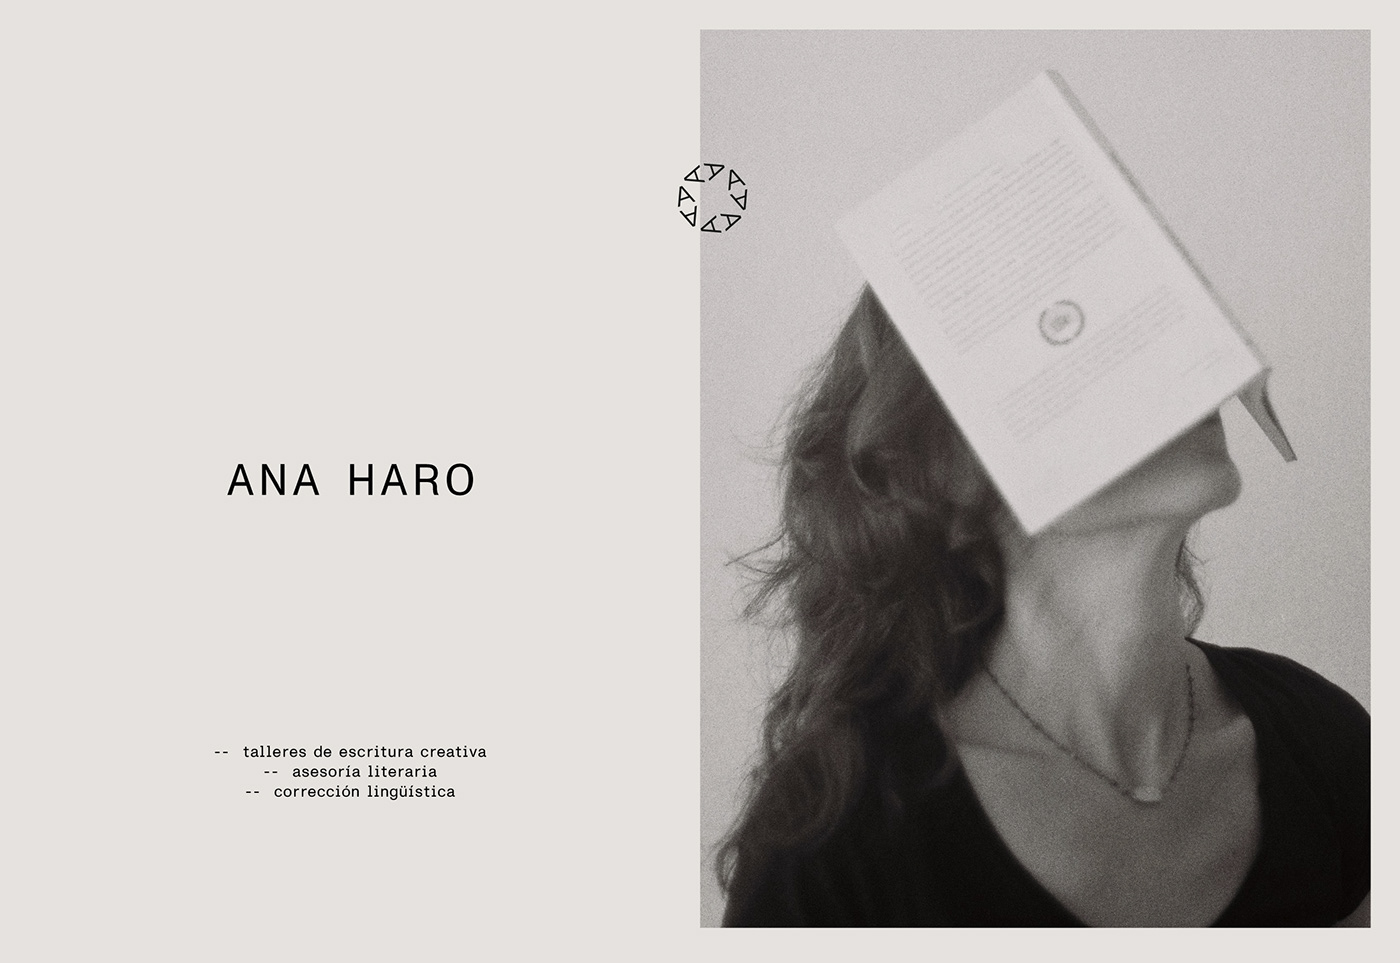 Portrait of Ana Haro with a book on her head, logo visible.